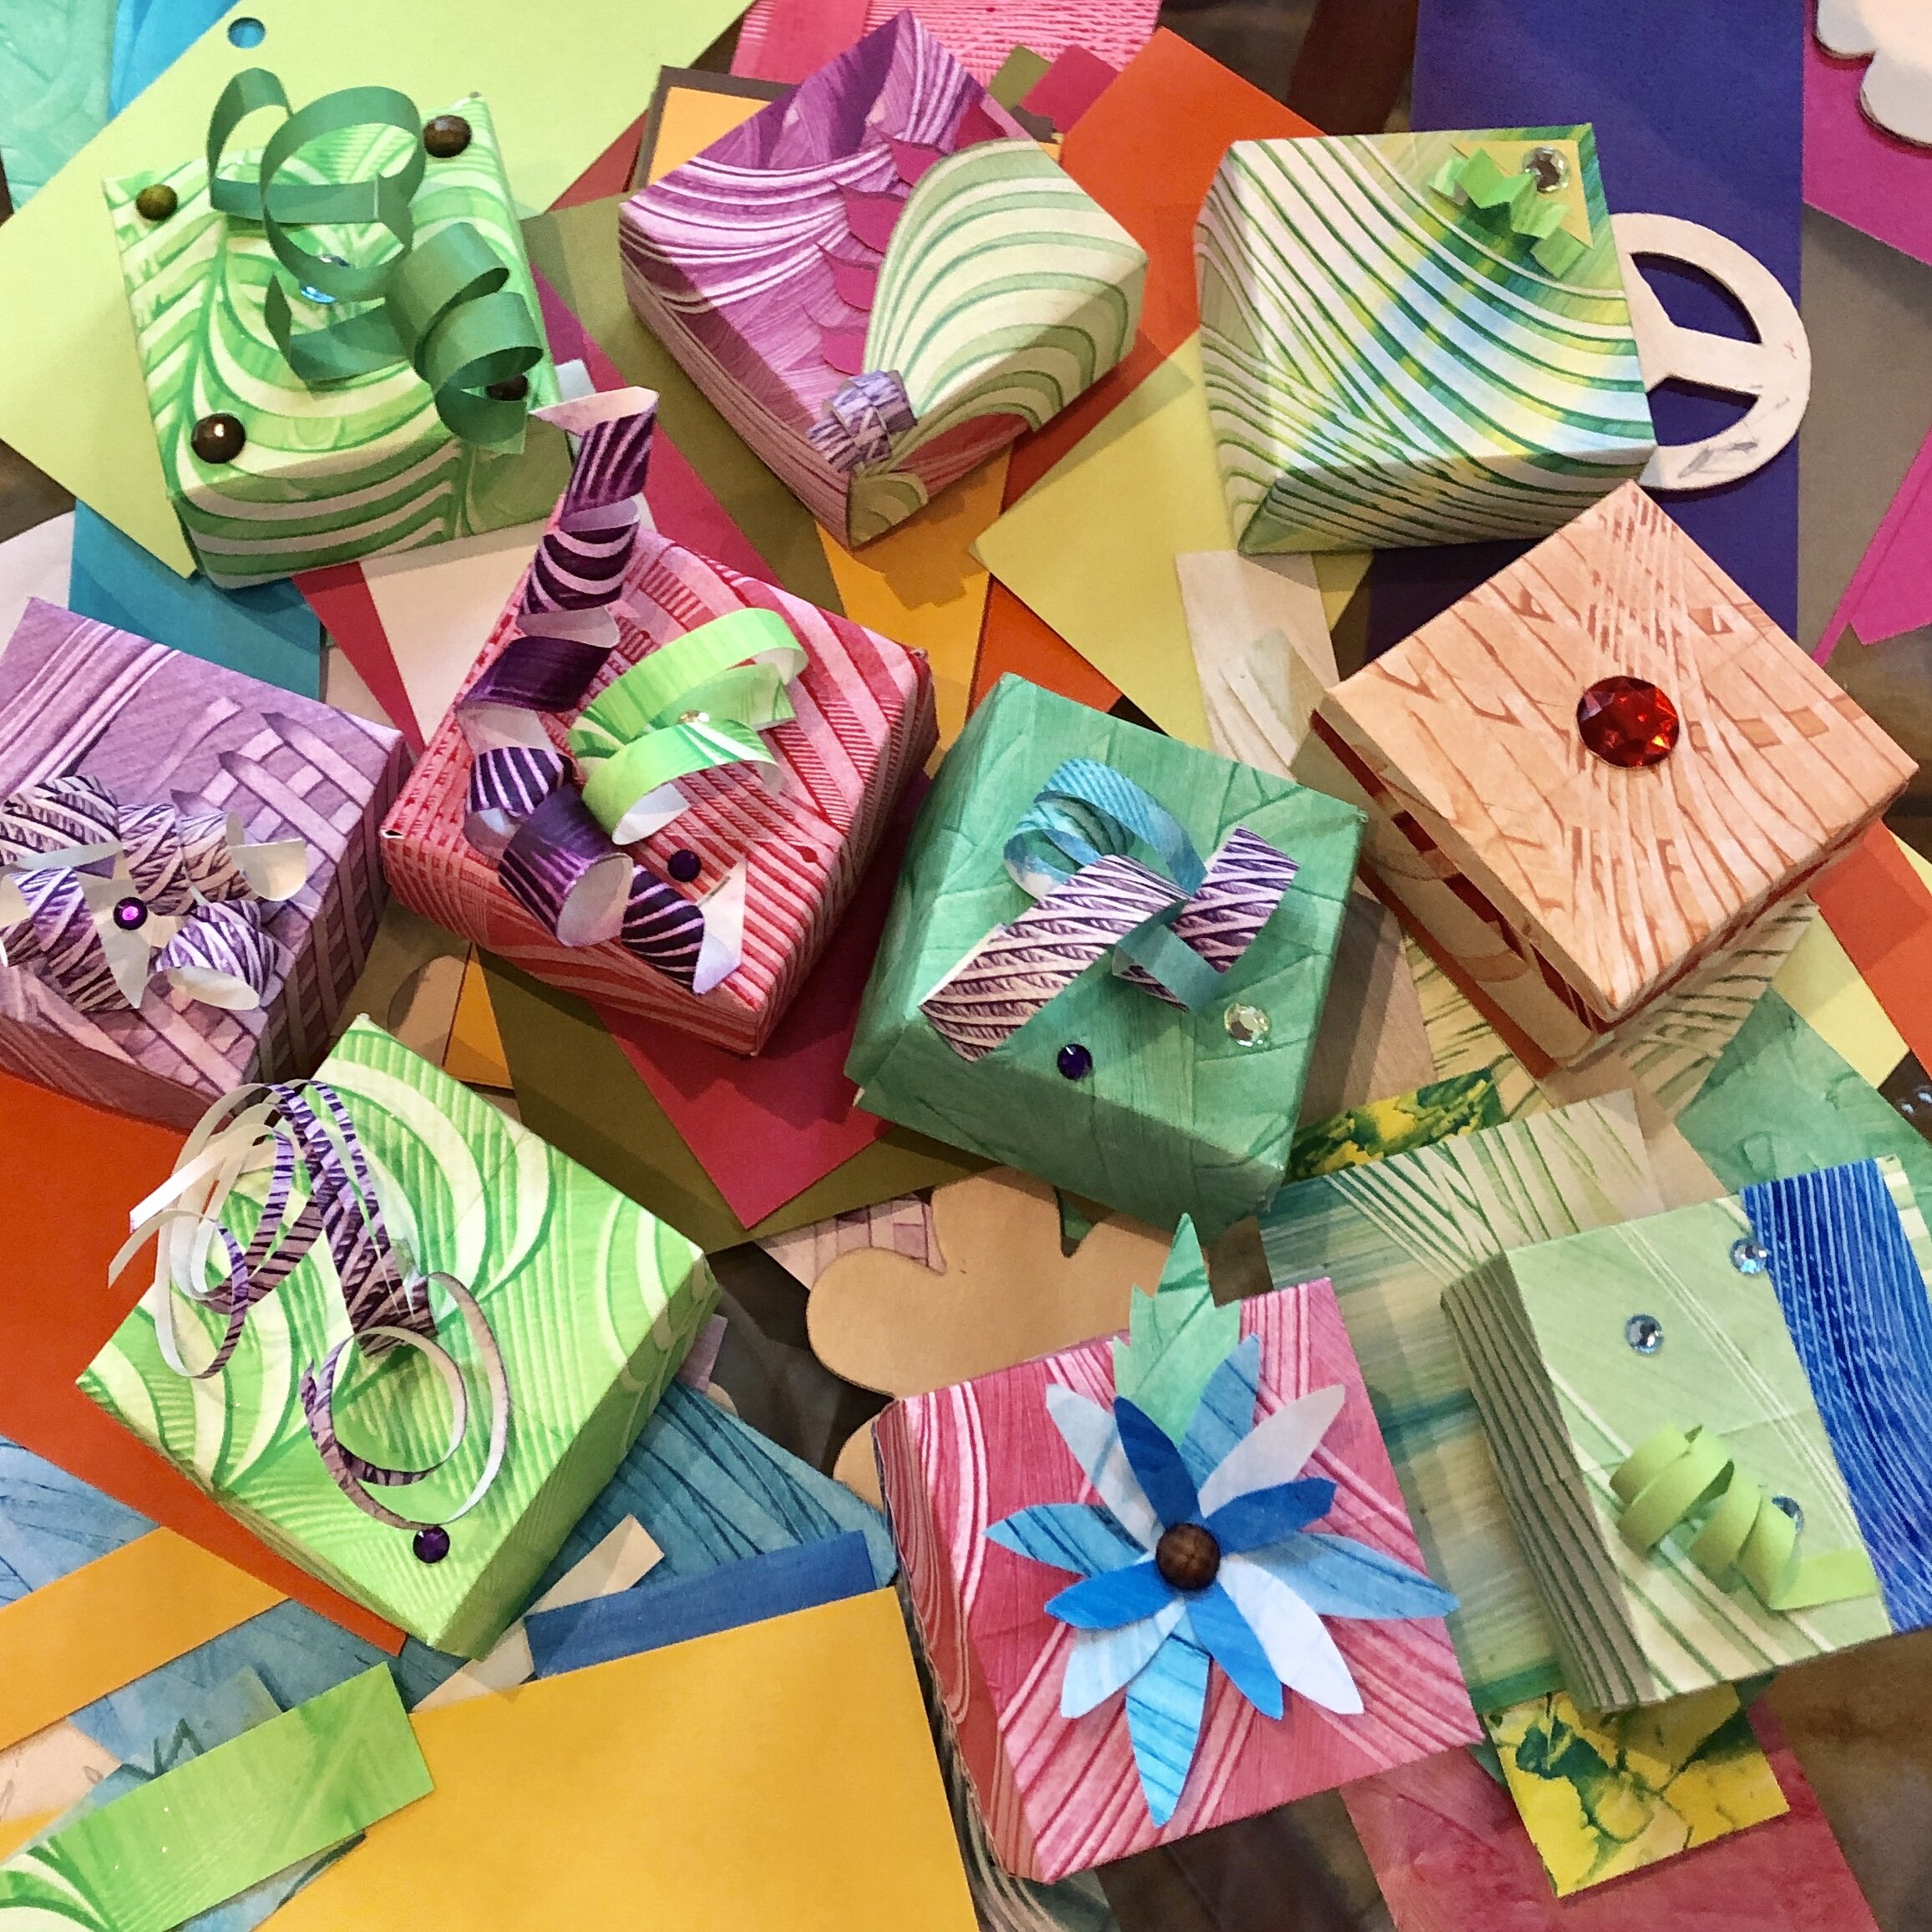 Gallery of origami boxes 